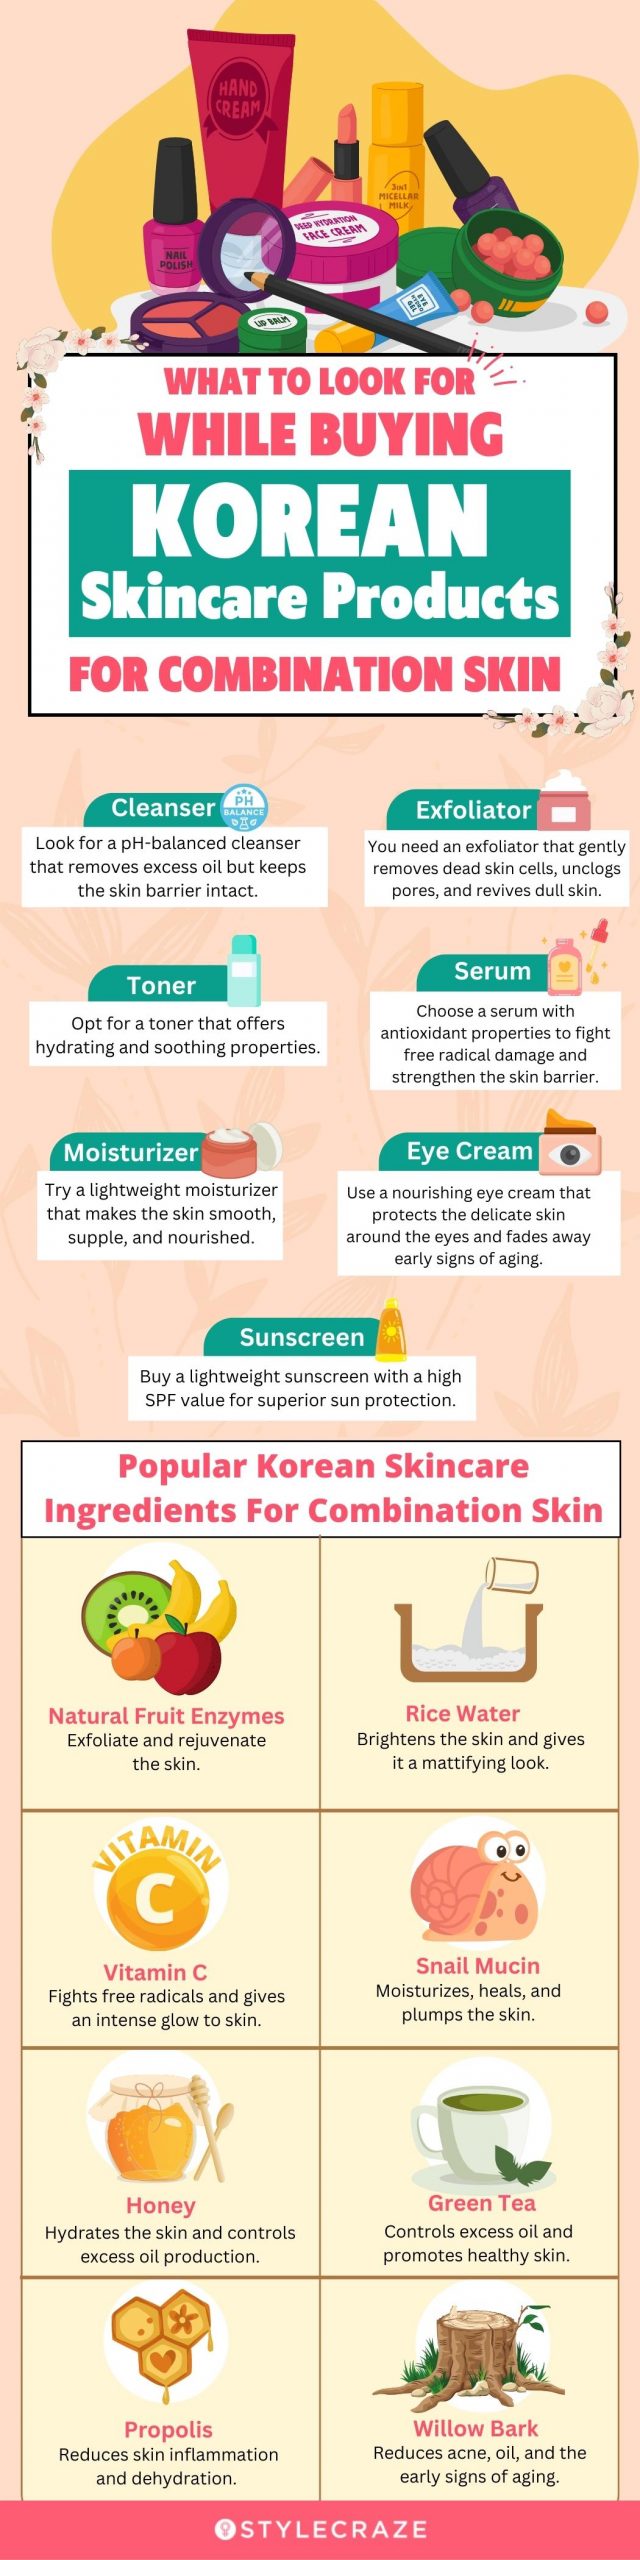 What To Look For While Buying Korean Skincare For Combination Skin [infographic]